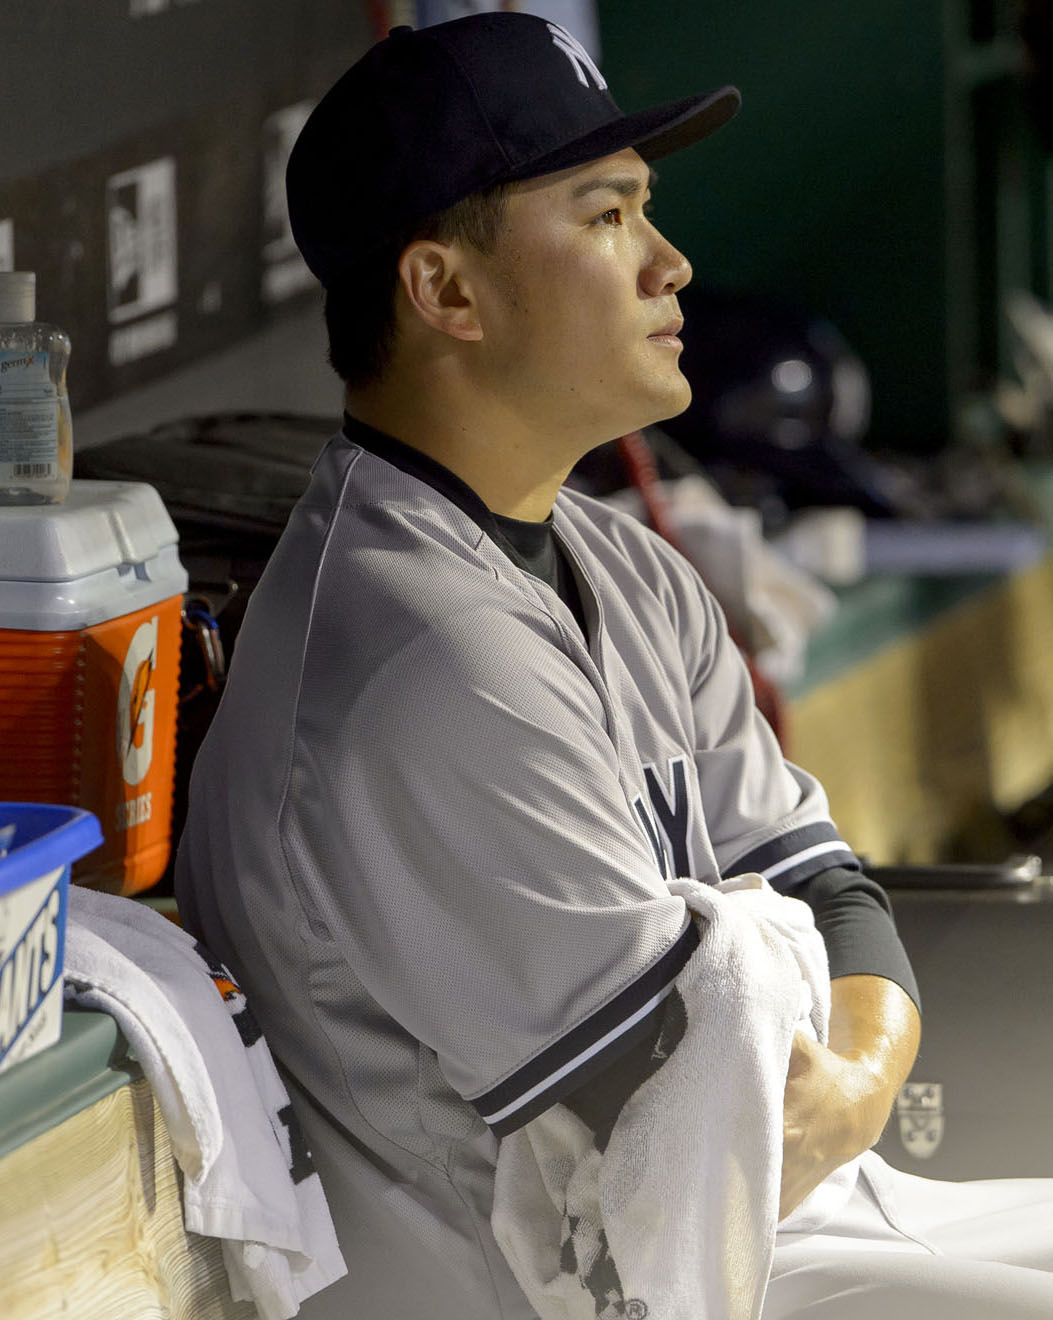 Starting pitcher Masahiro Tanaka #19 of the New York Yankees sits in the dugout after leaving the game during the seventh inning against the Cleveland Indians on July 8th, 2014 